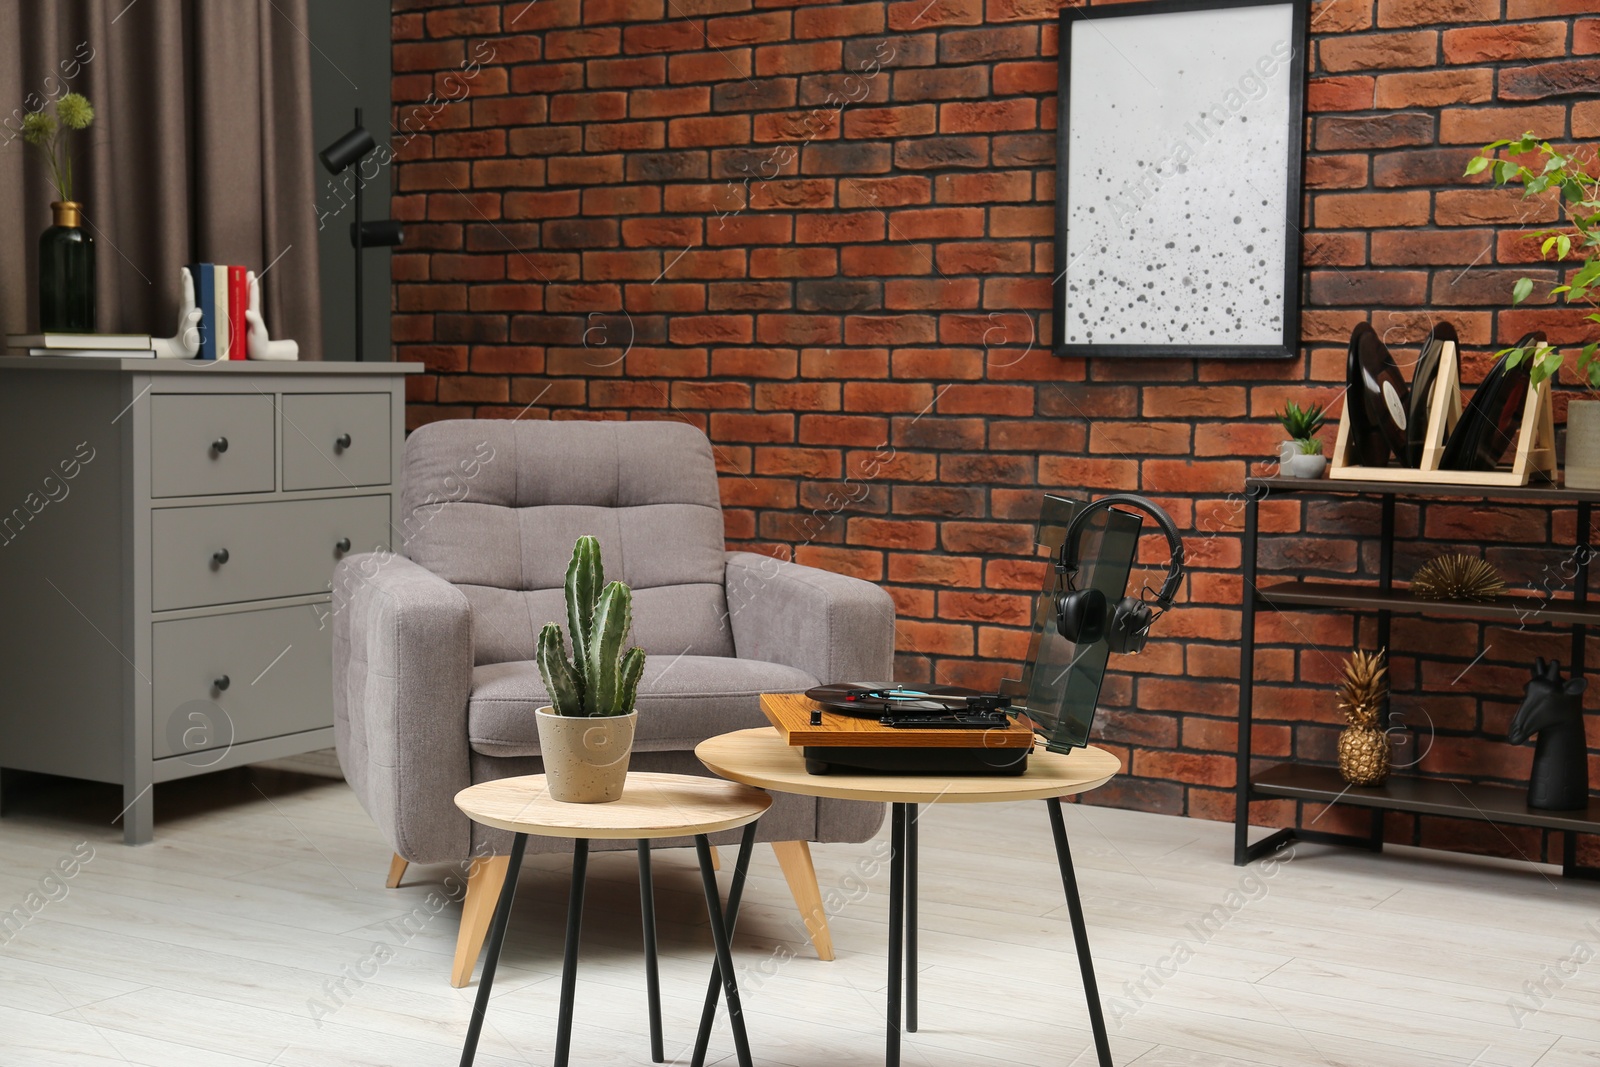 Photo of Stylish interior with modern furniture, turntable and houseplants on table indoors